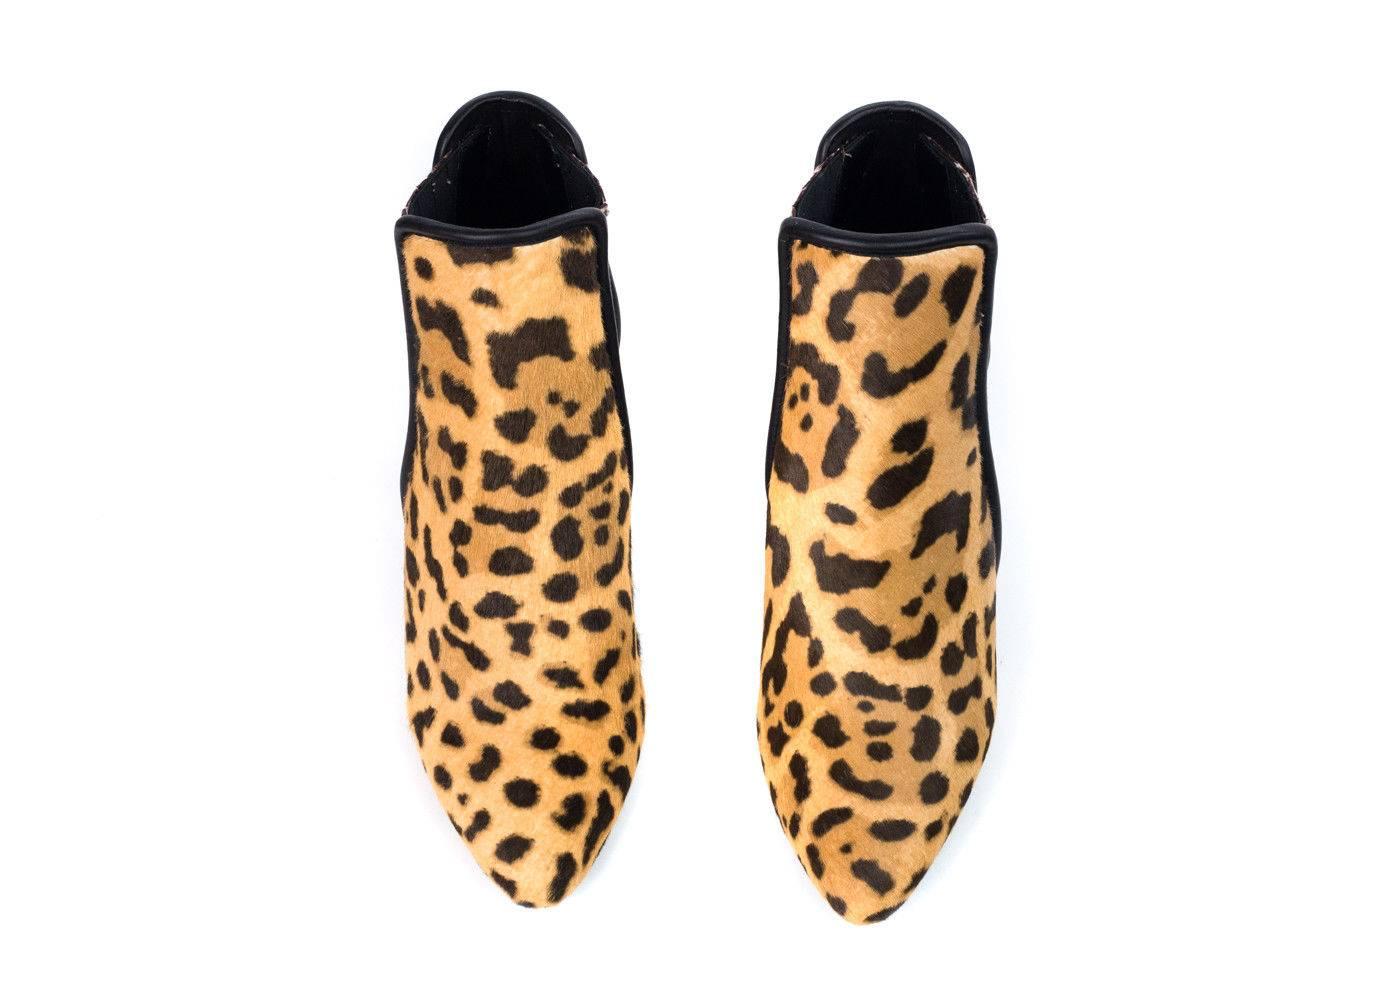 Roberto Cavalli's leopard print ankle boots feature a black leather trim. These ankle boots are sure to add a bit of drama to any outfit. Pair it with black leather leggings and a sweater for an cozy look.

Composition: 100% Leather
Pull On